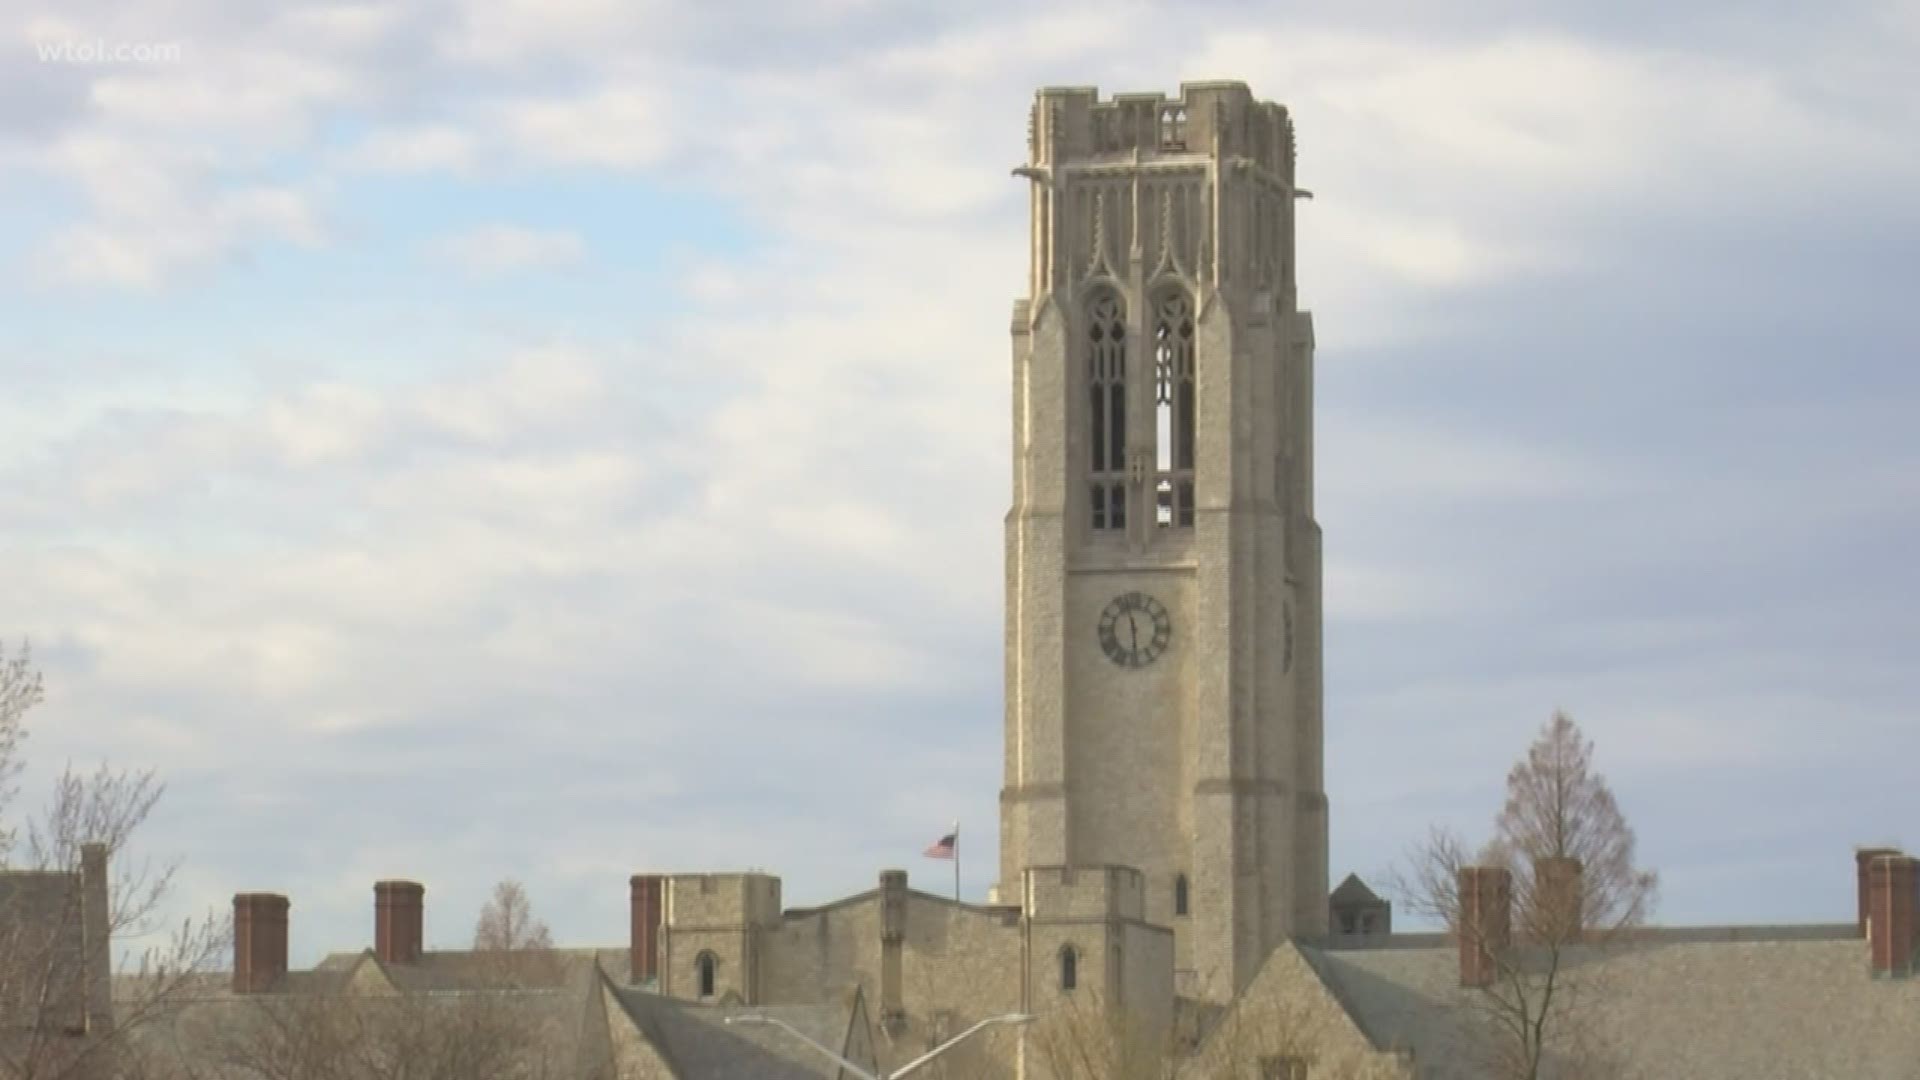 Because right now, we need it: The sights and sounds of nature at the University of Toledo campus, captured by WTOL 11 photojournalist John Juby.